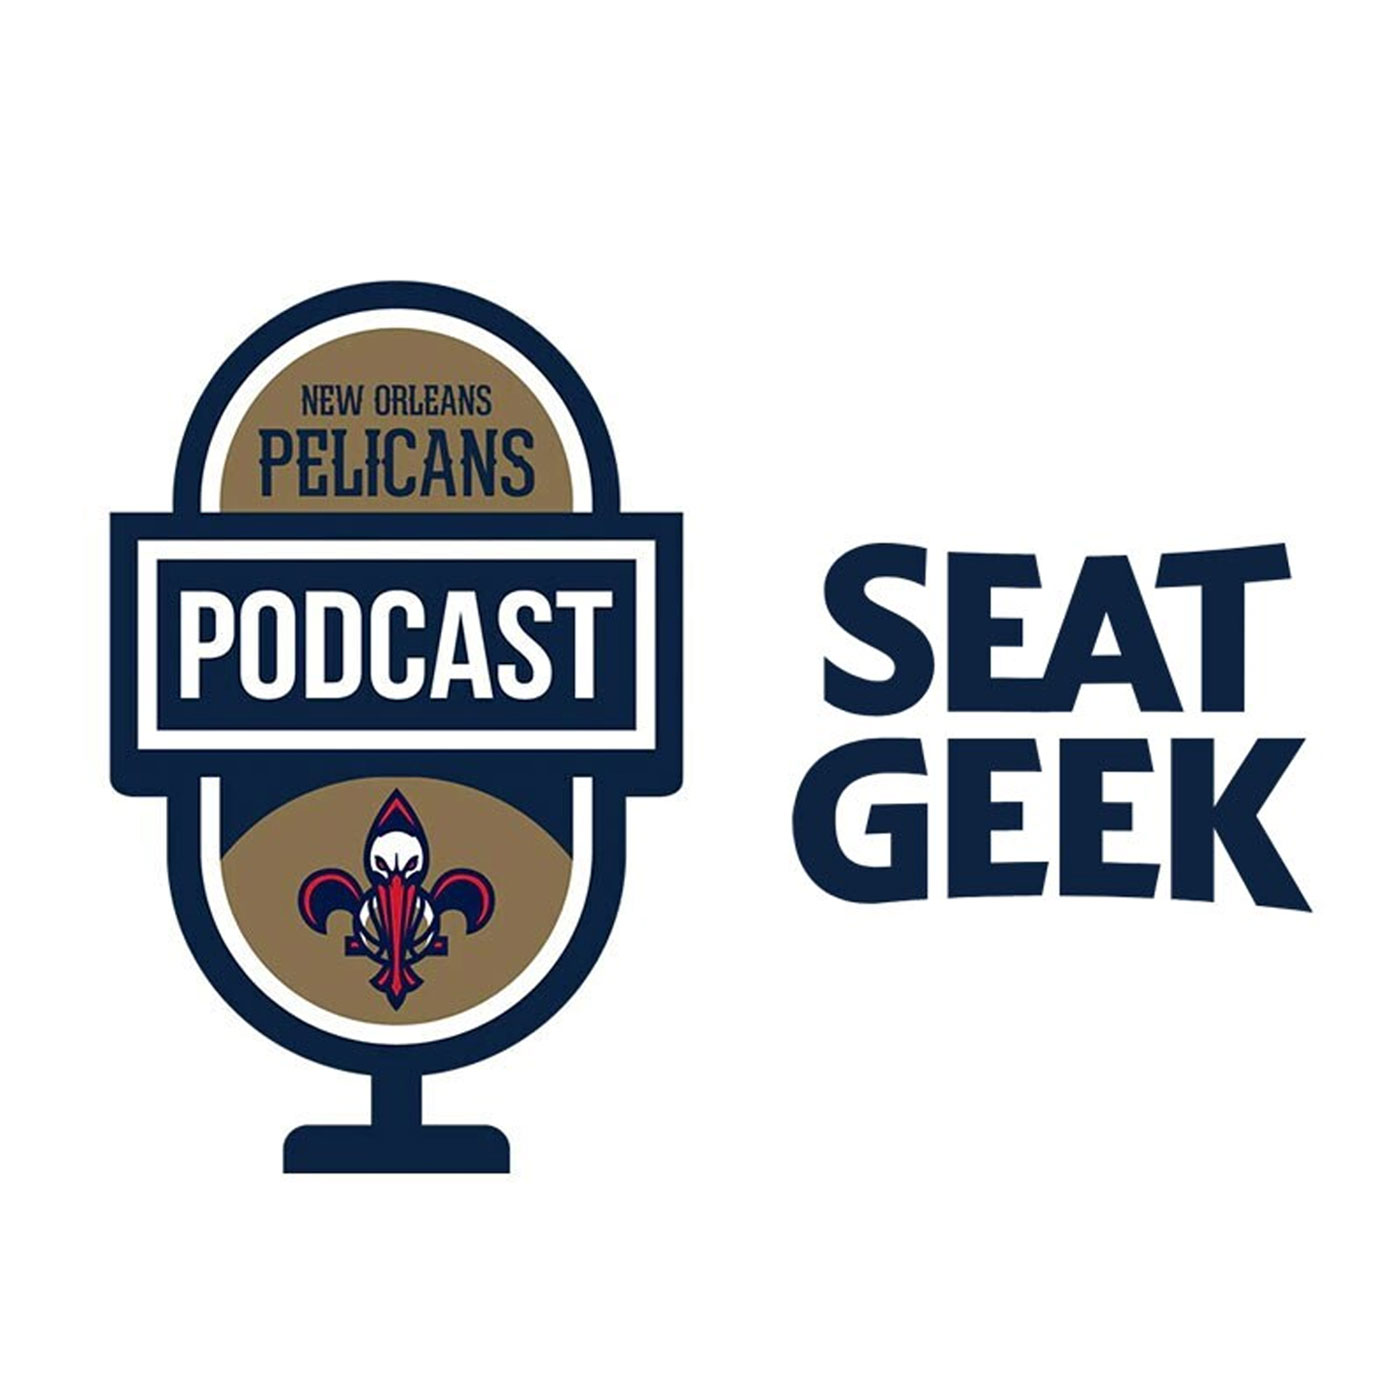 Pelicans Roundtable Discussion on the New Orleans Pelicans Podcast presented by SeatGeek - December 17, 2021